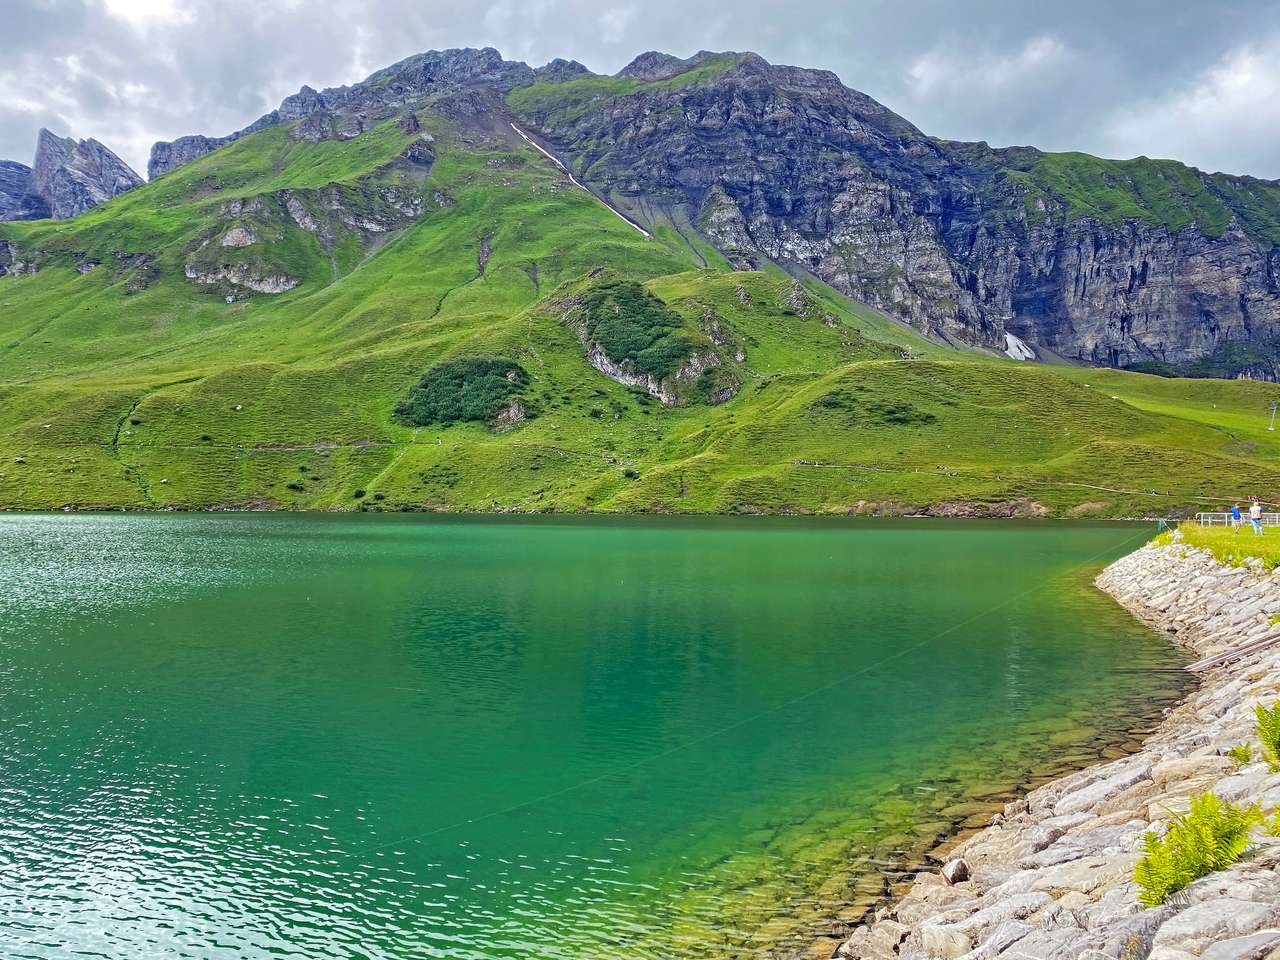 The alpine lake Melchsee puzzle online from photo